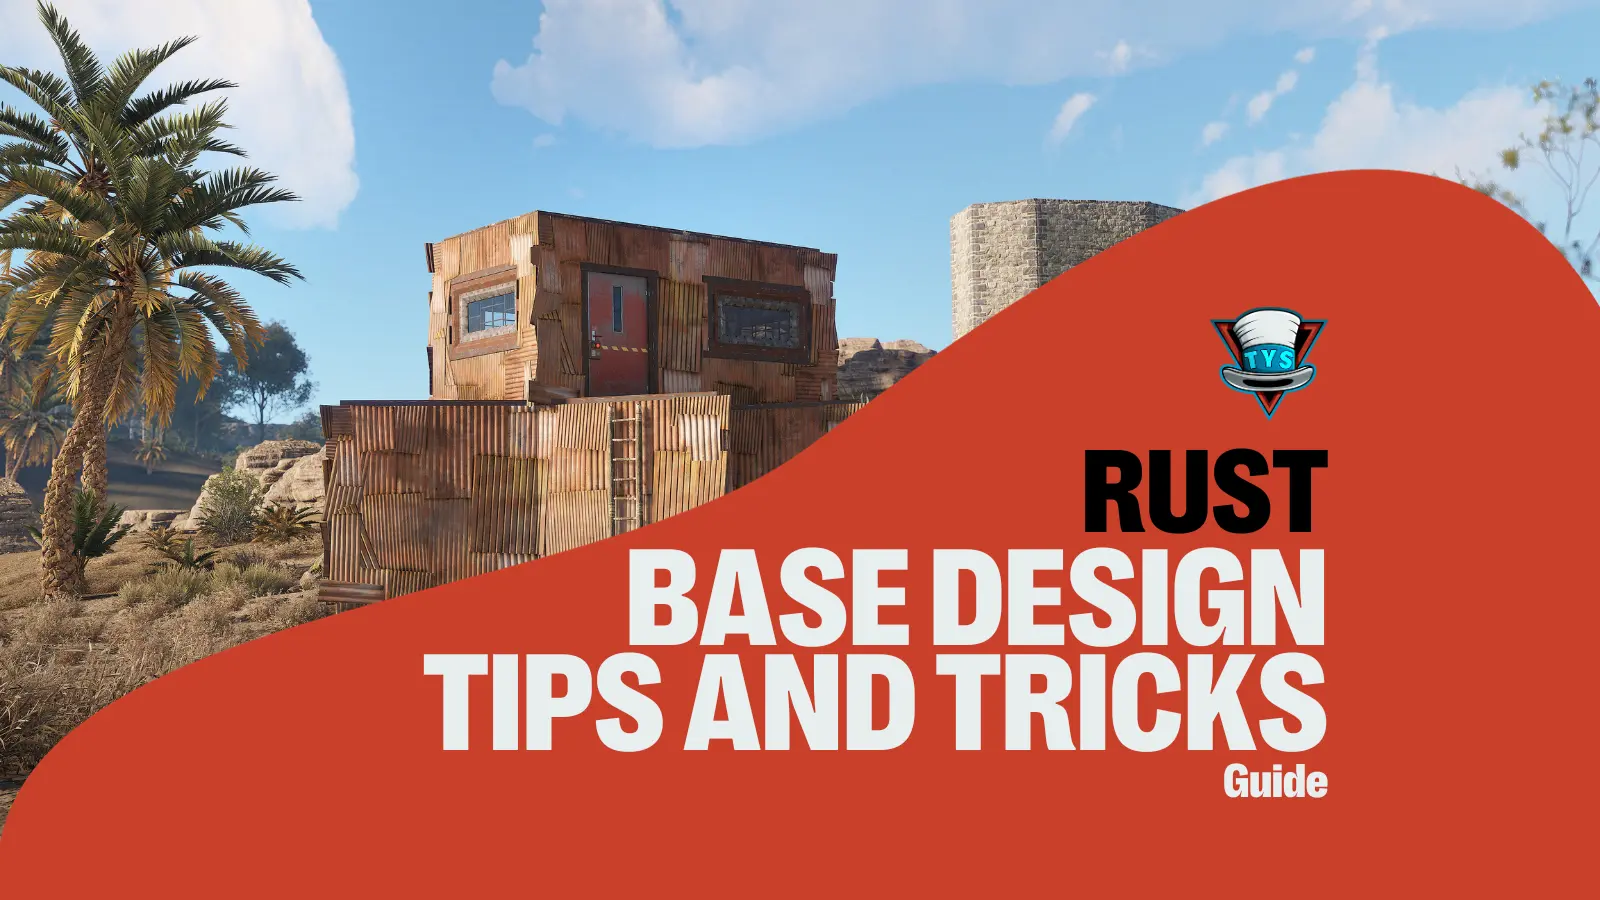 Rust Base Design: Tips and Tricks